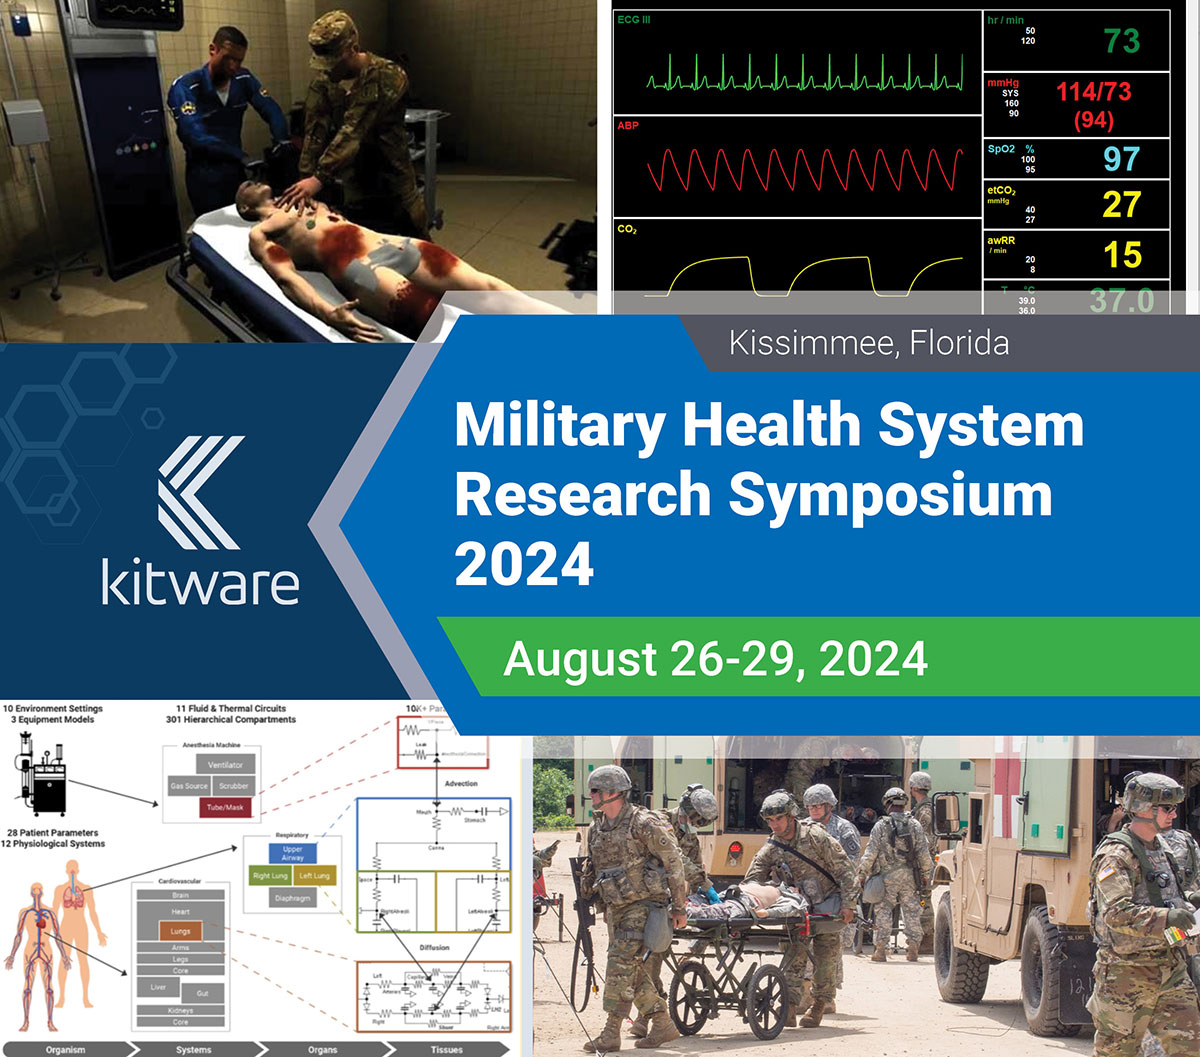 Military Health System Research Symposium 2024